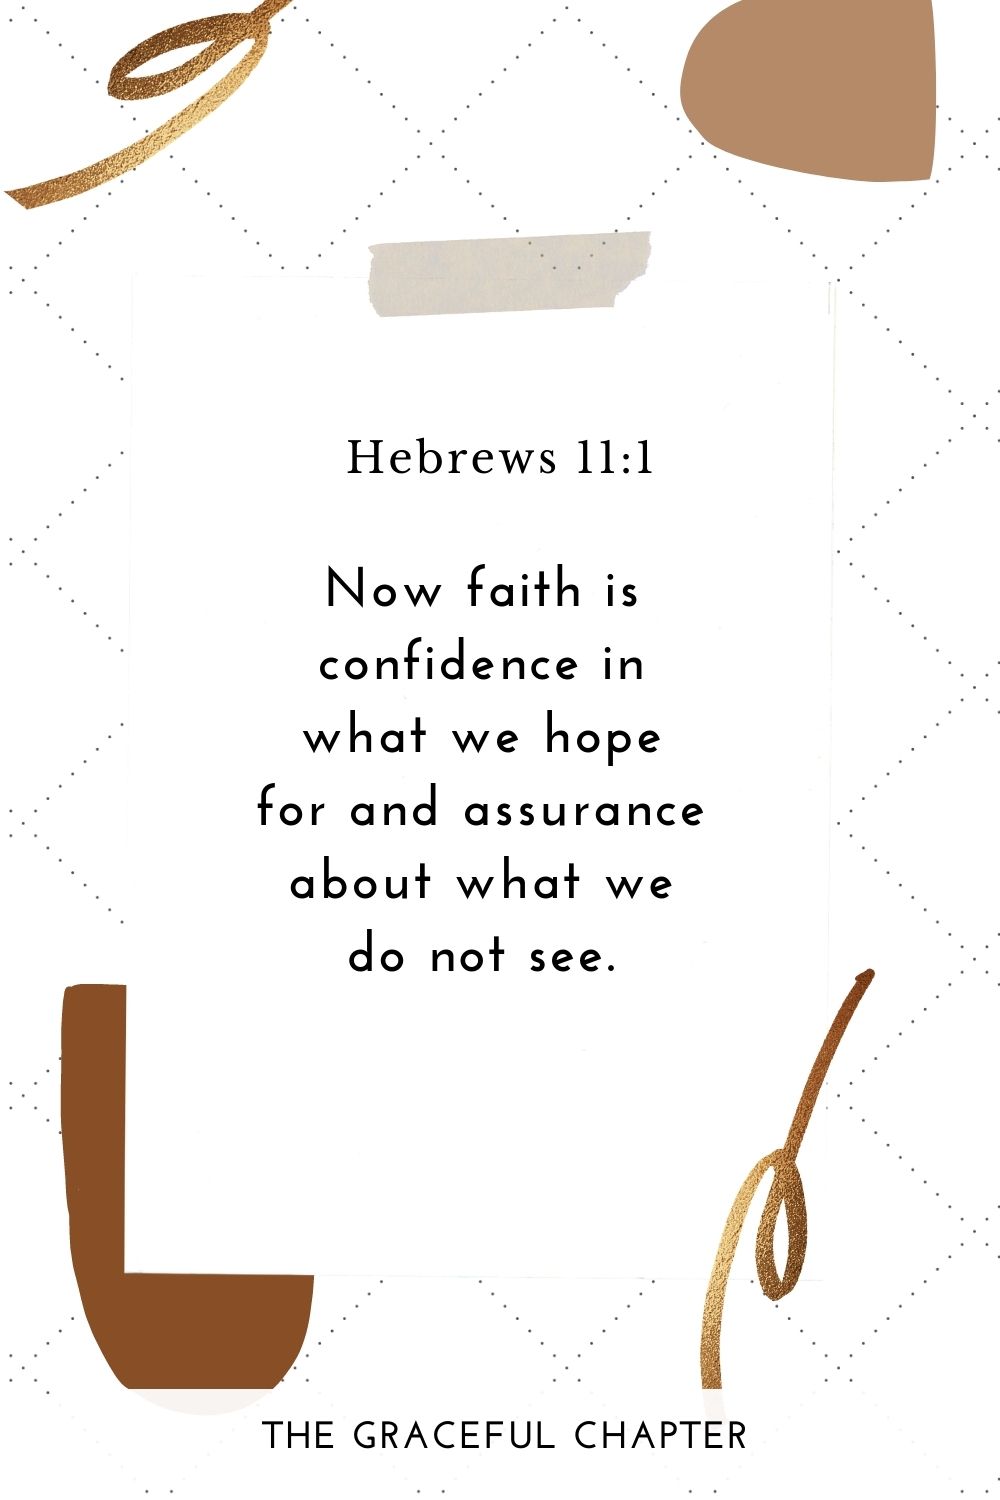 Now faith is confidence in what we hope for and assurance about what we do not see. Hebrews 11:1